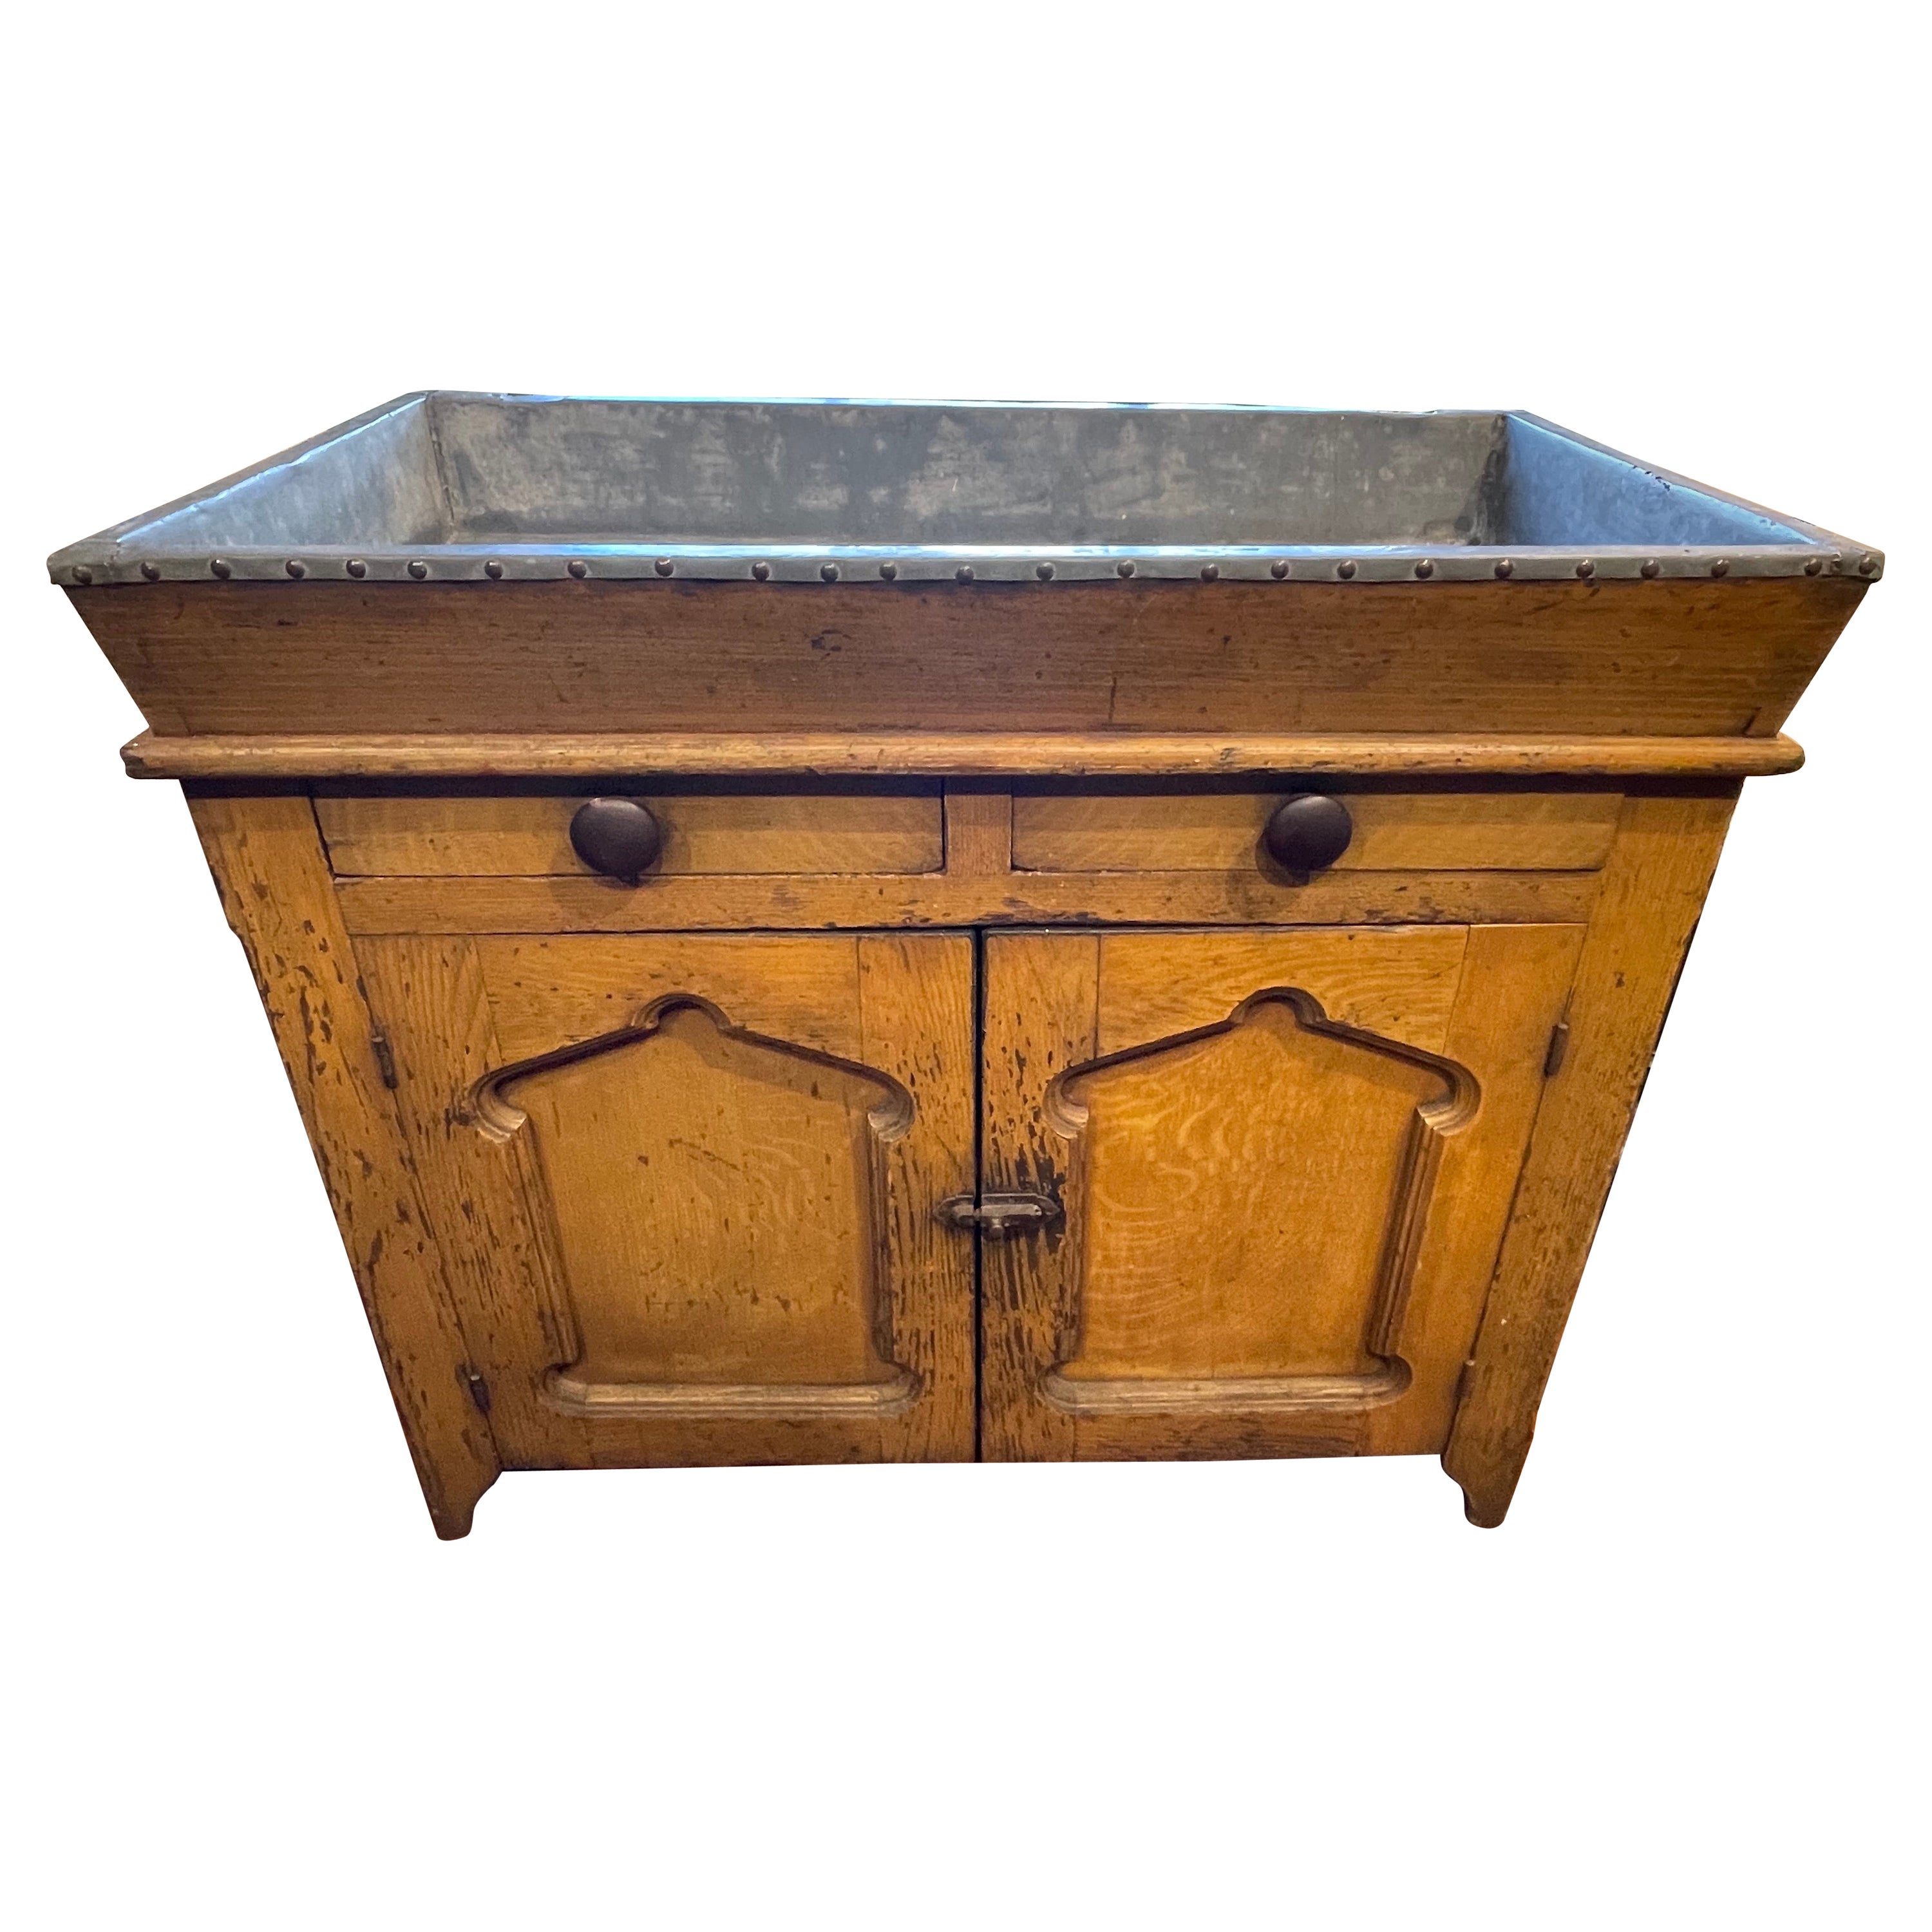 19th Century Dry Sink with Zinc Top and Mustard Paint